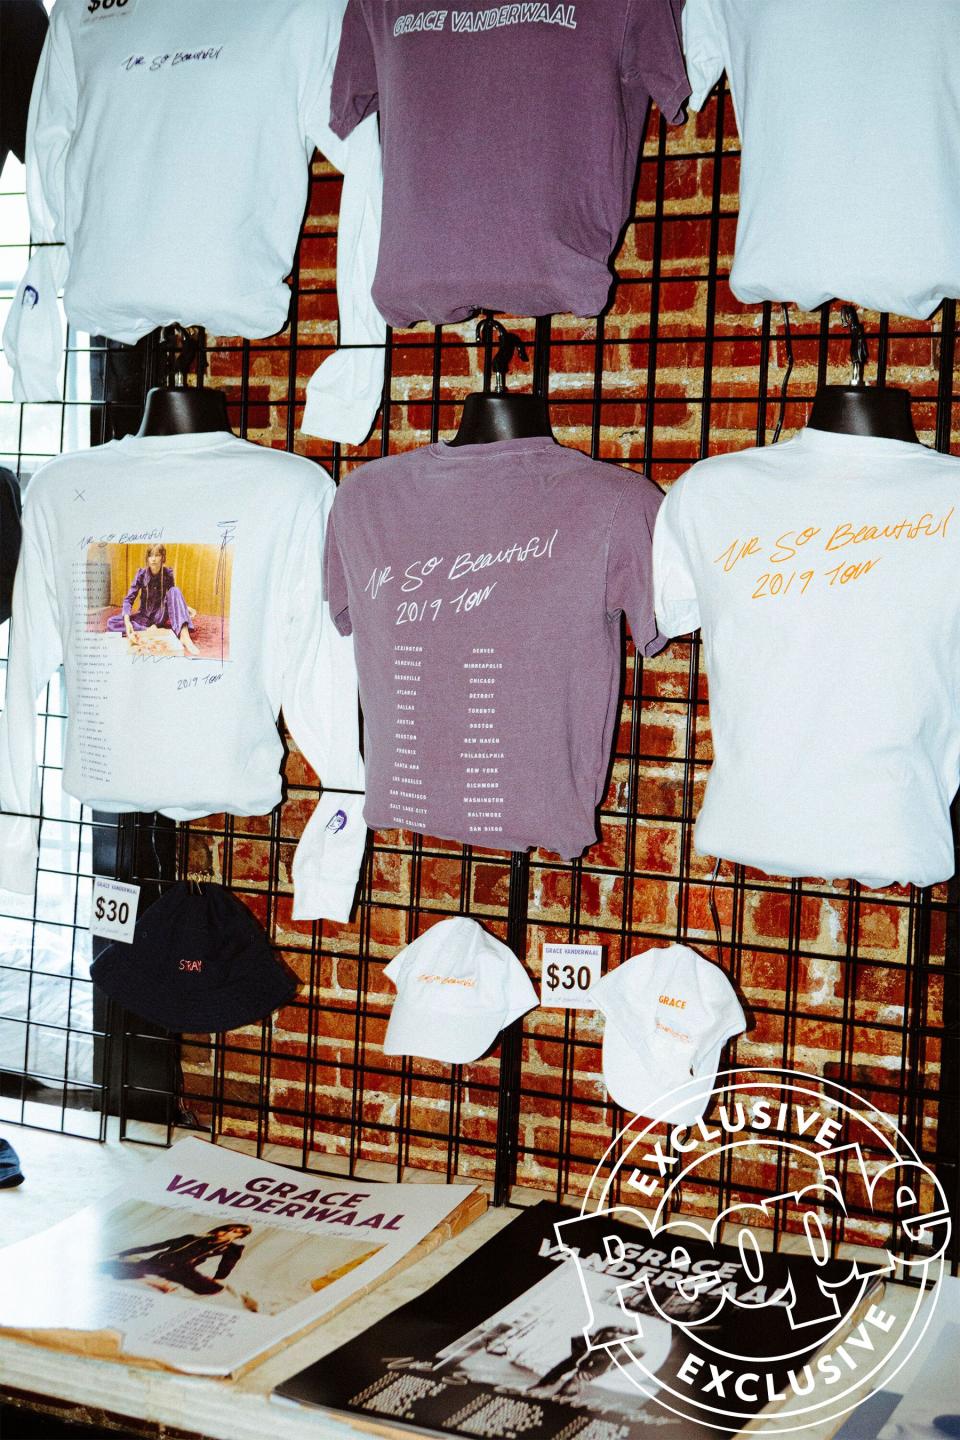 "Checkin' on the merch. New stuff just came in for tour."